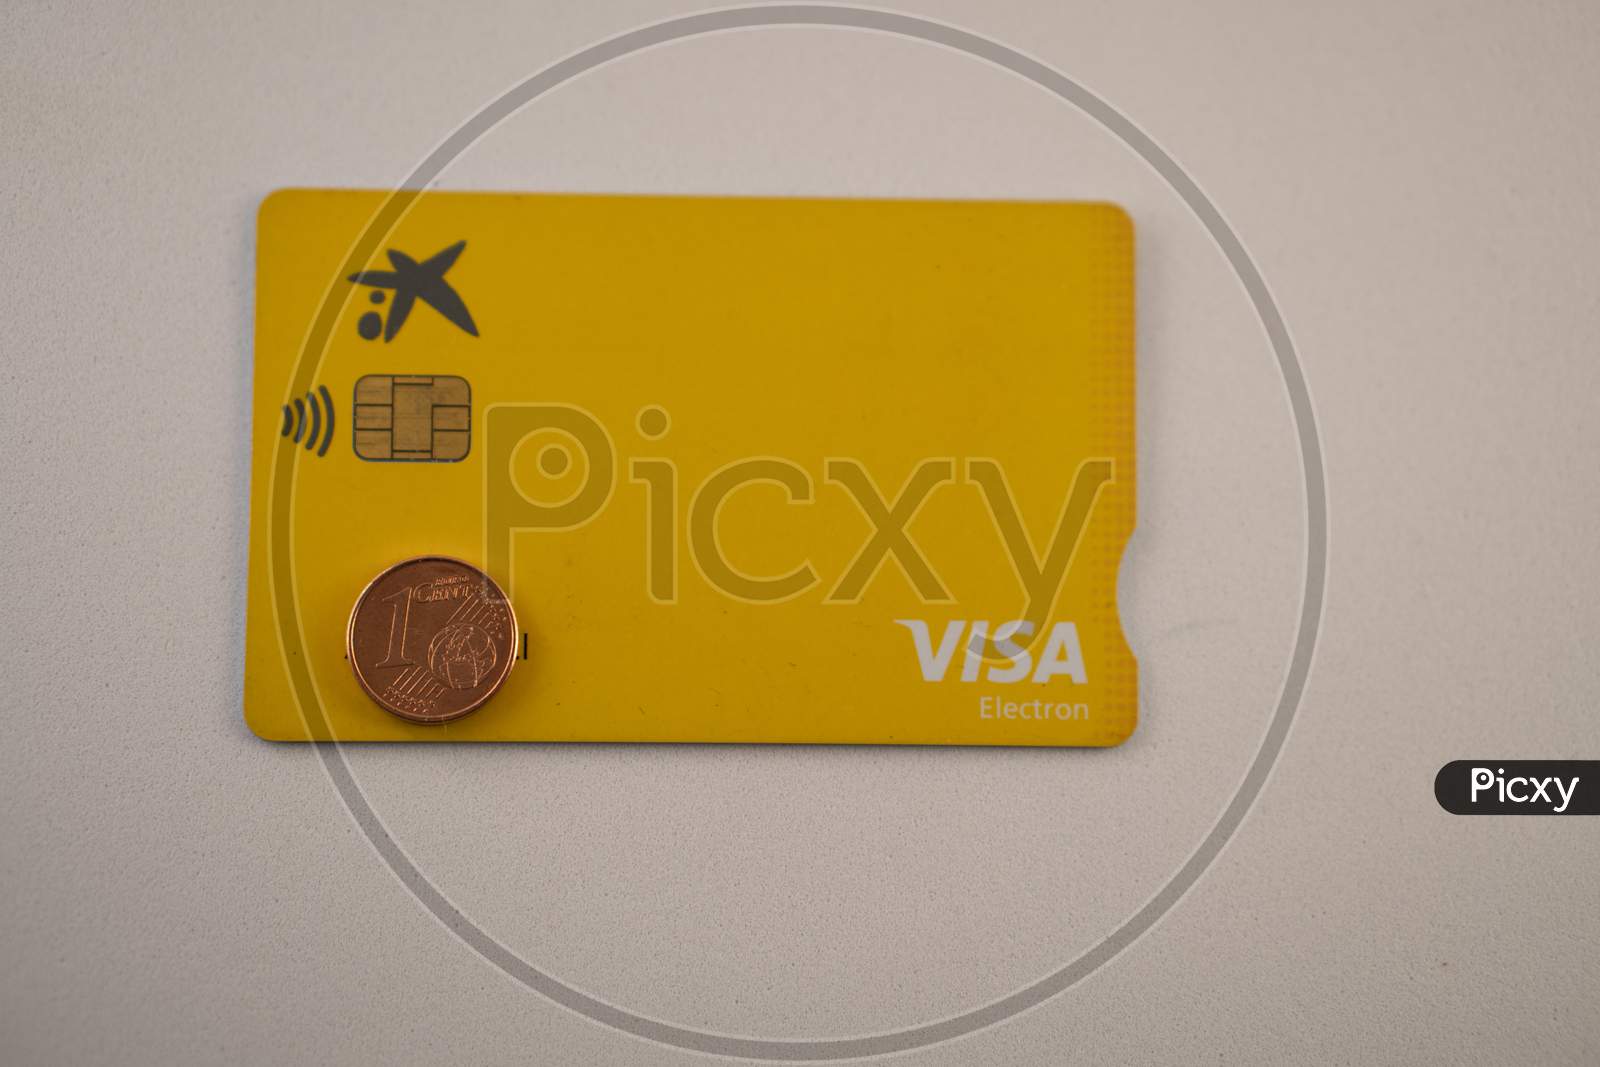 one euro coin and debit visa card against a white background.